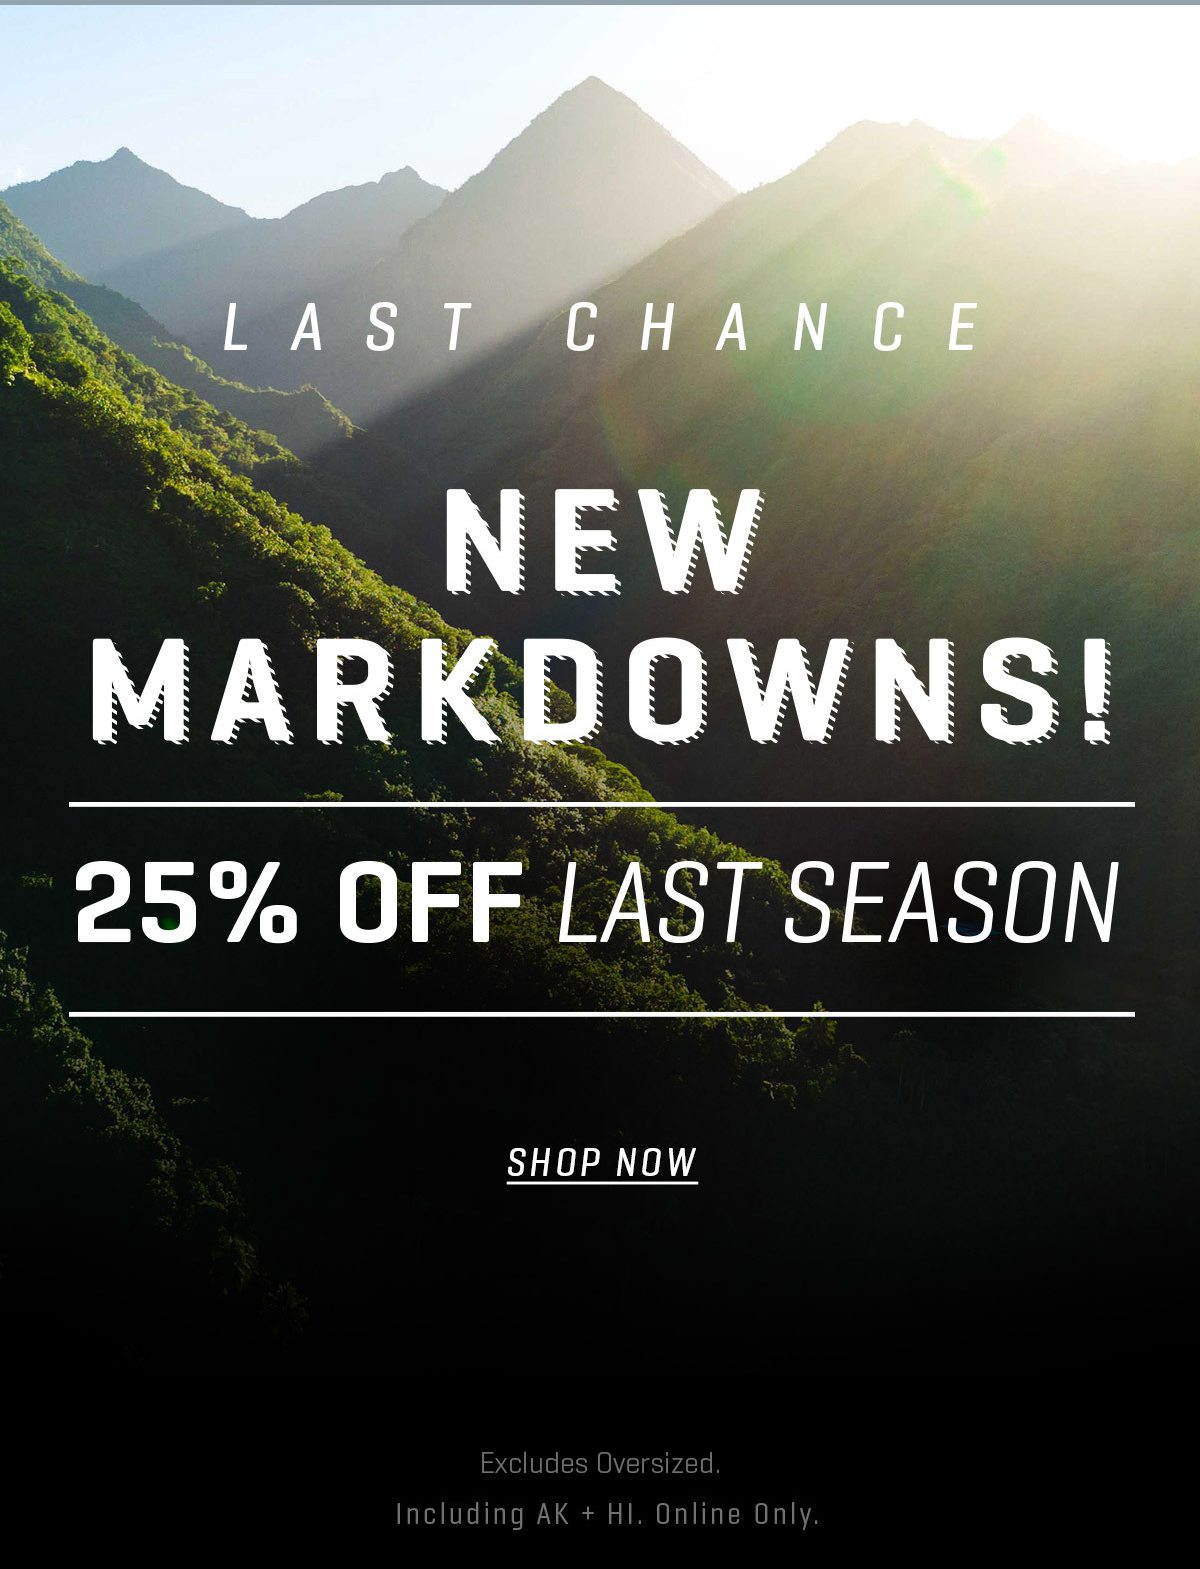 Ends Tonight! New Markdowns